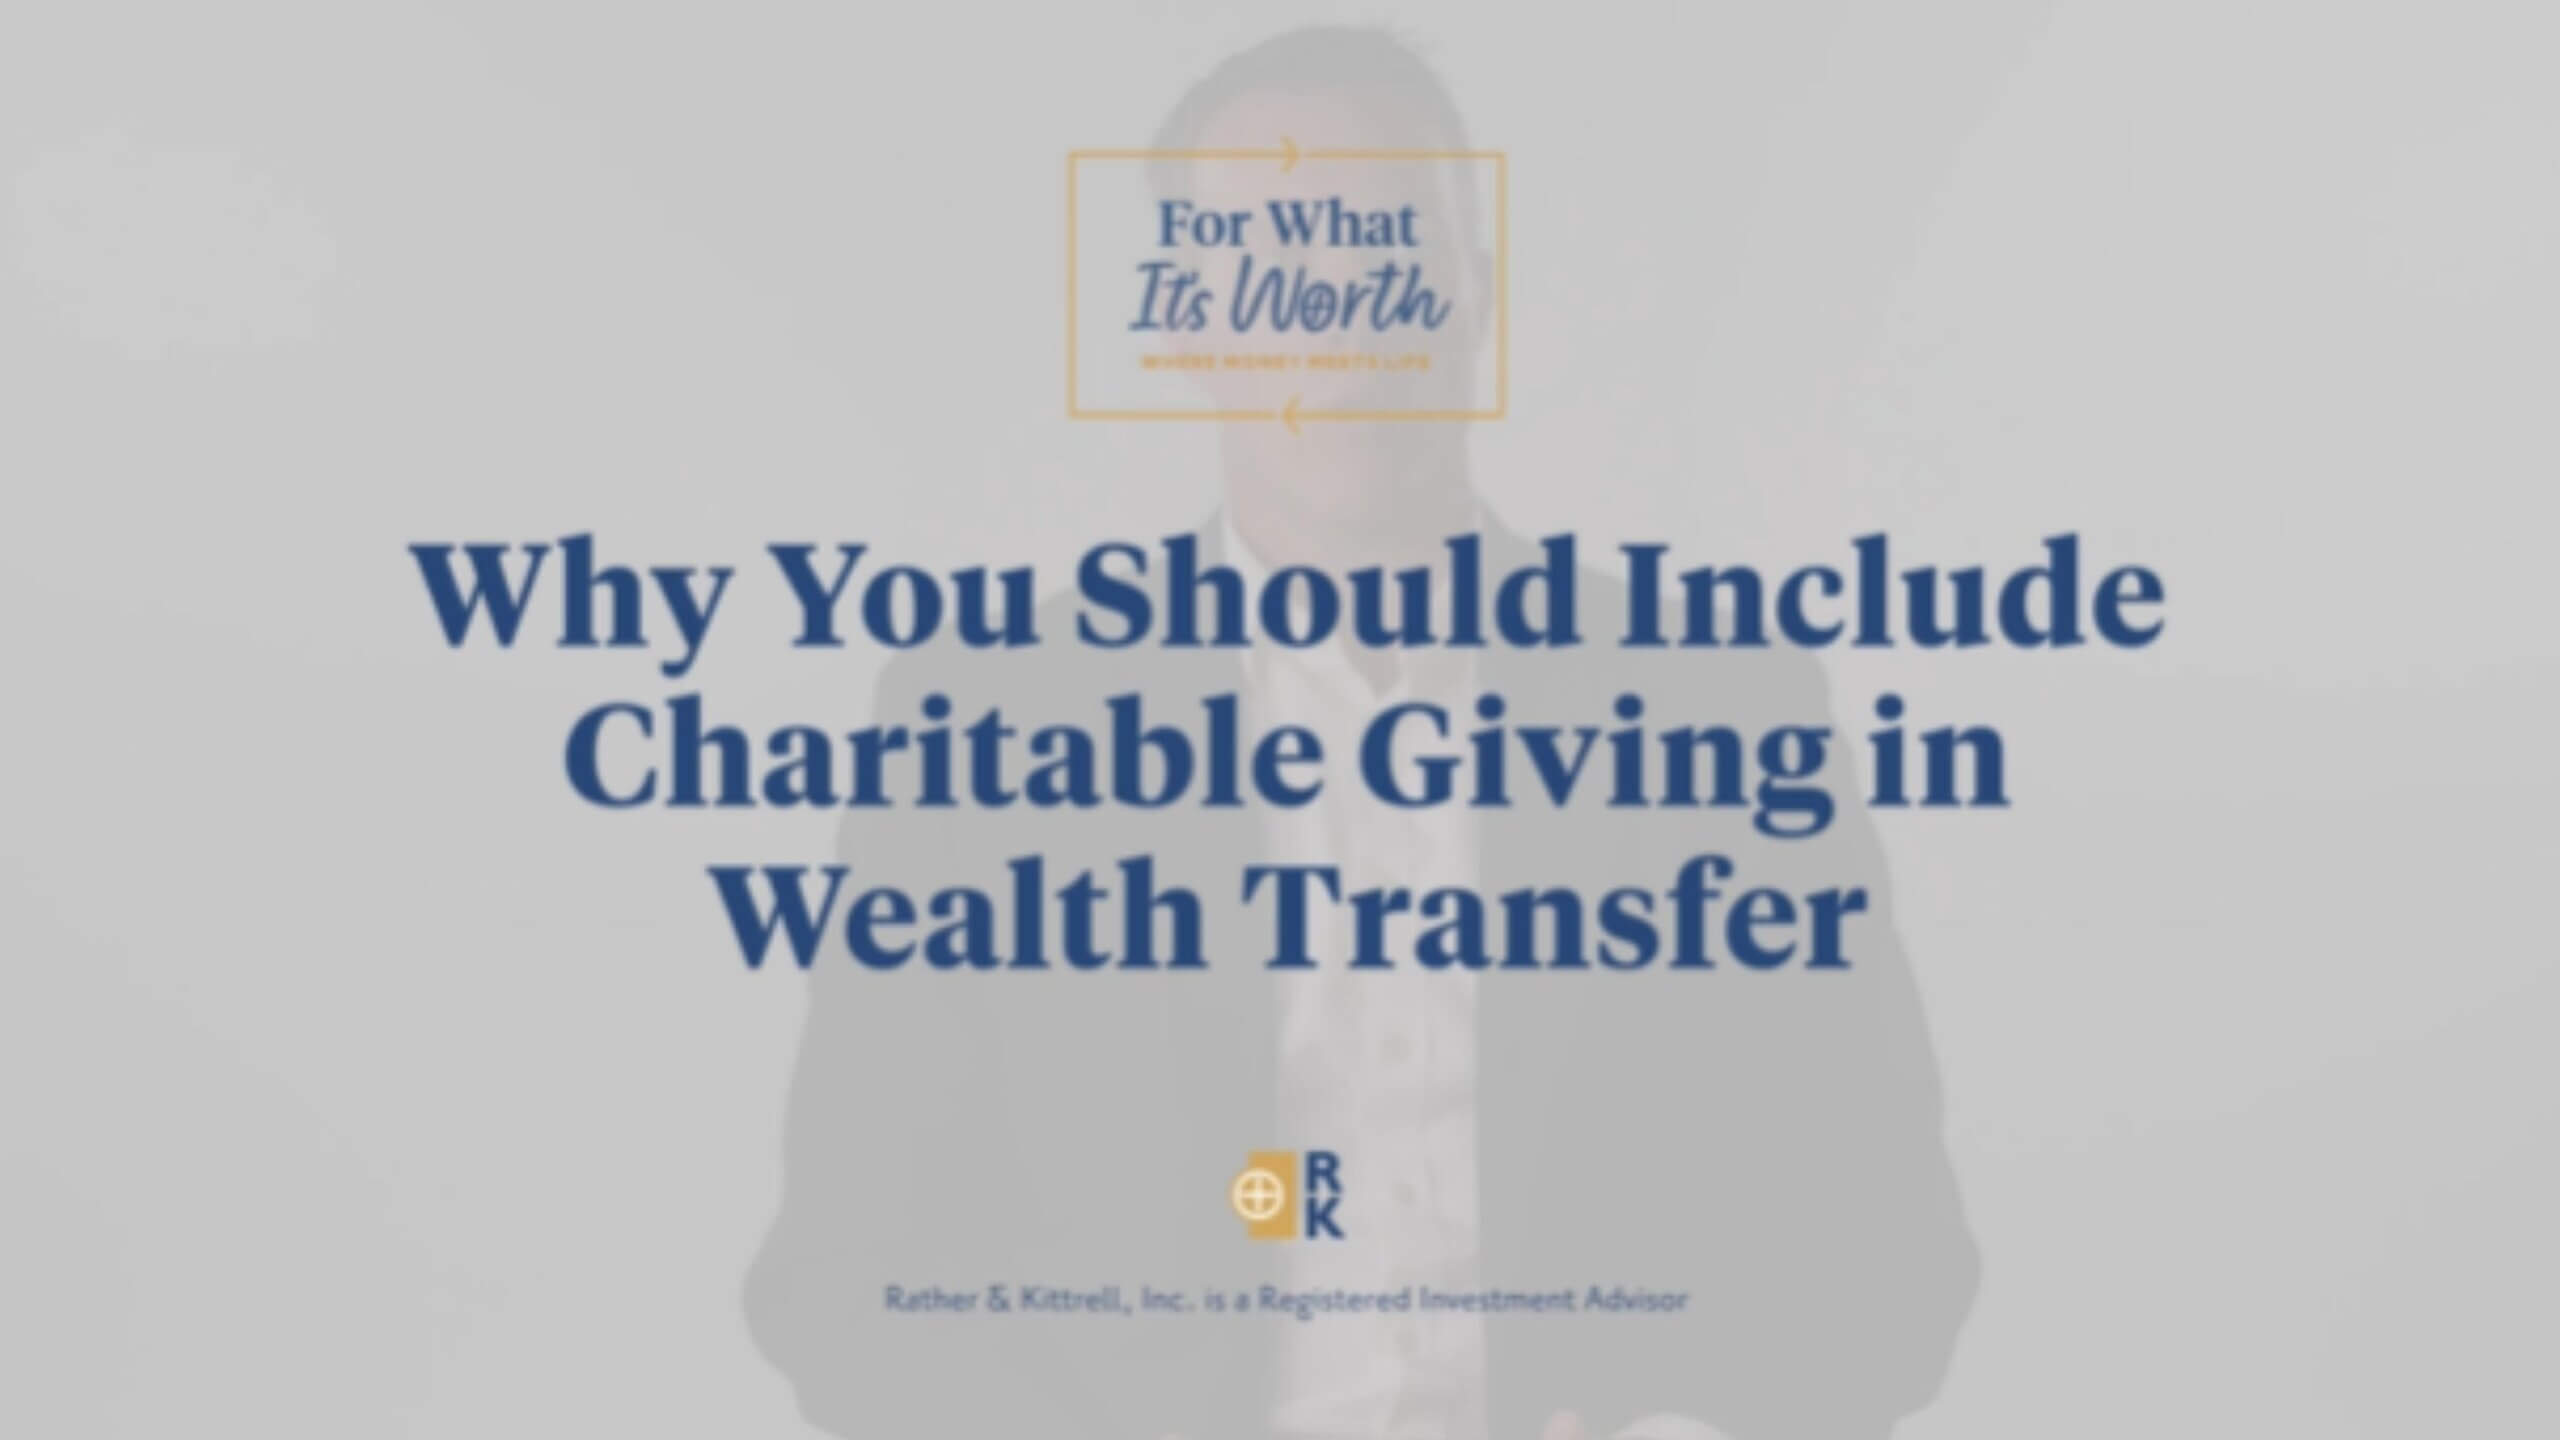 Why you should include charitable giving in wealth transfer